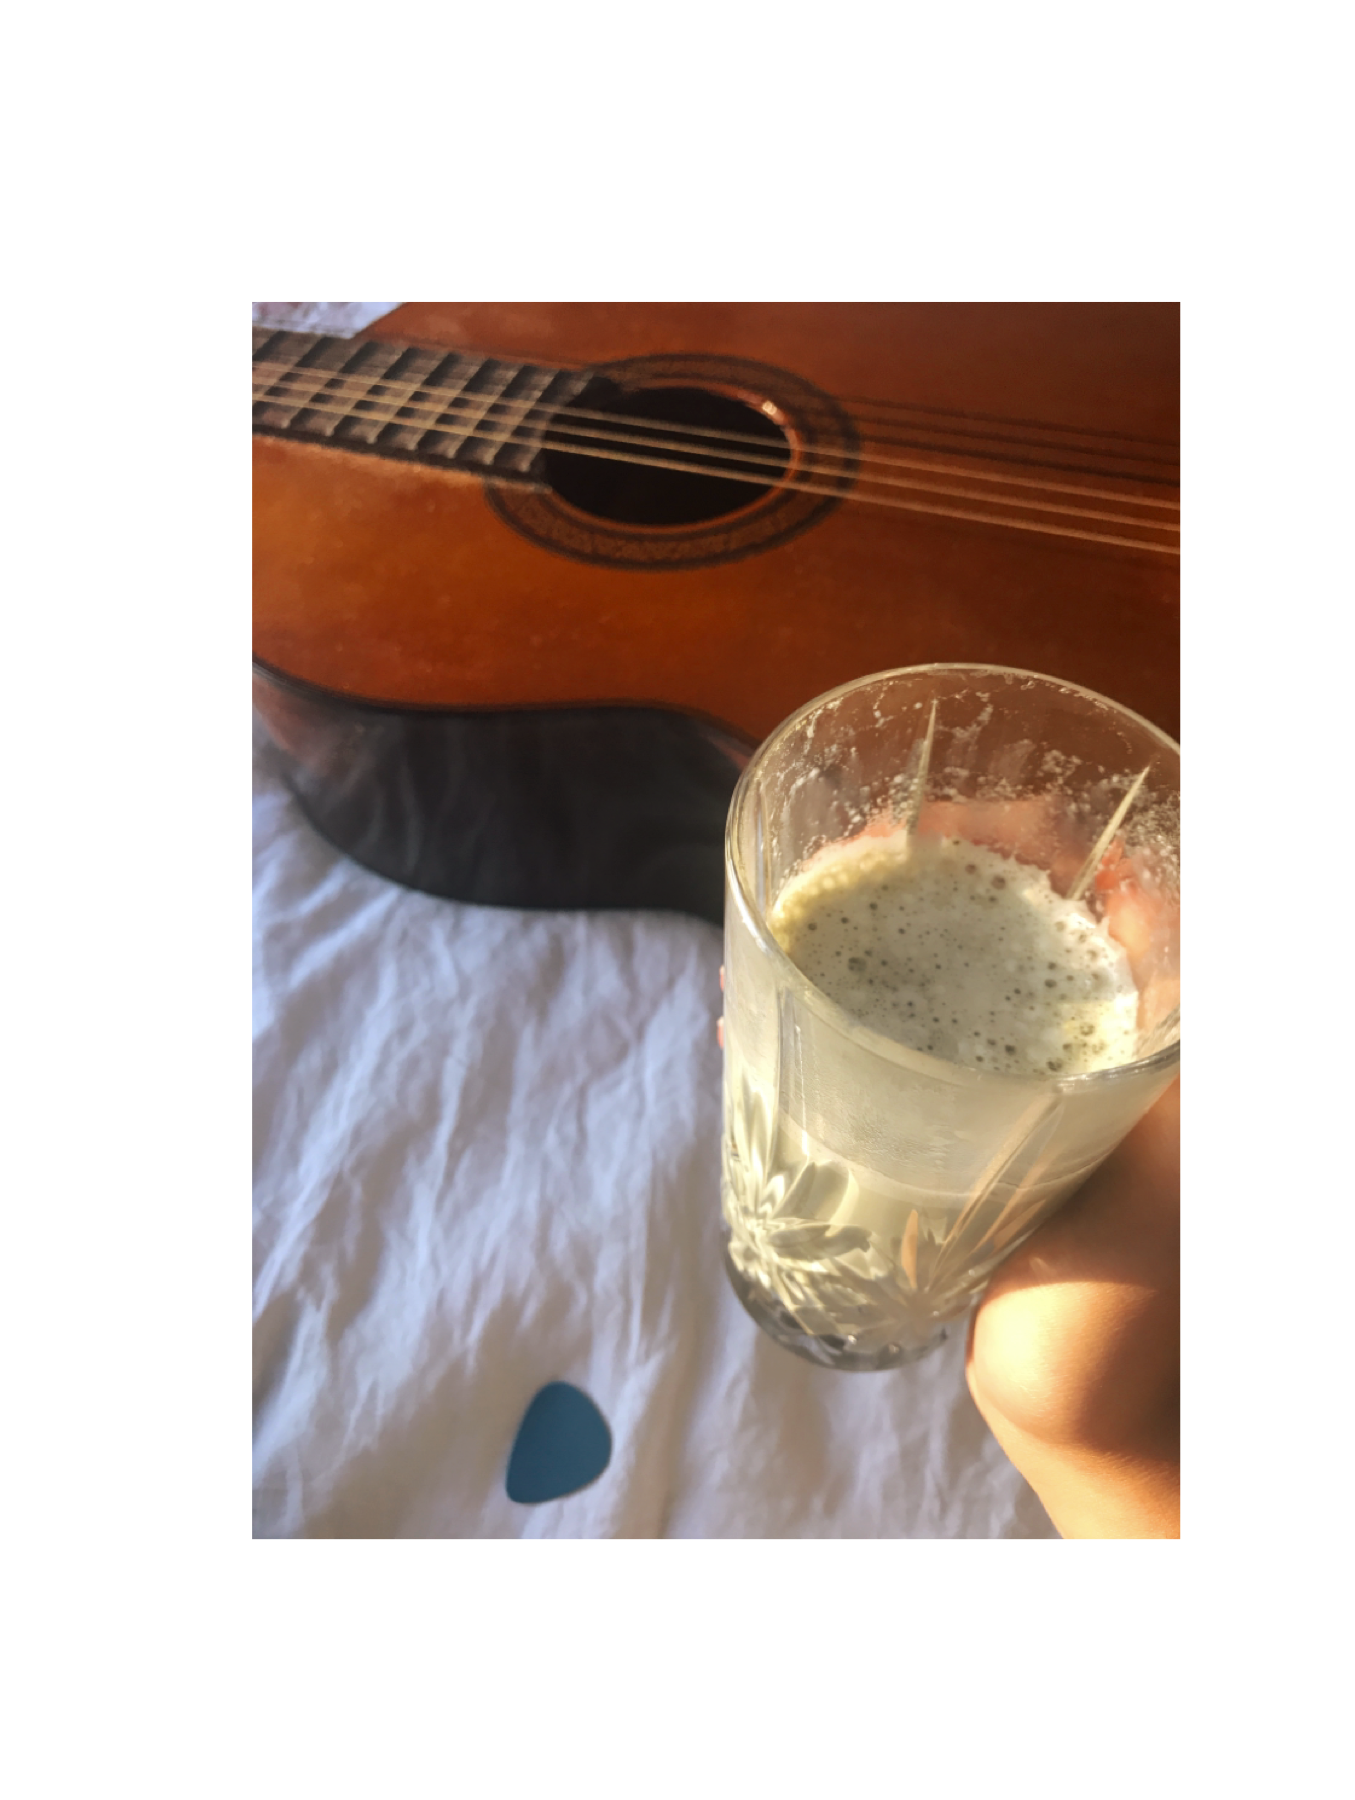 matcha latte, golden hour, and guitar playing 💫good vibes 💫